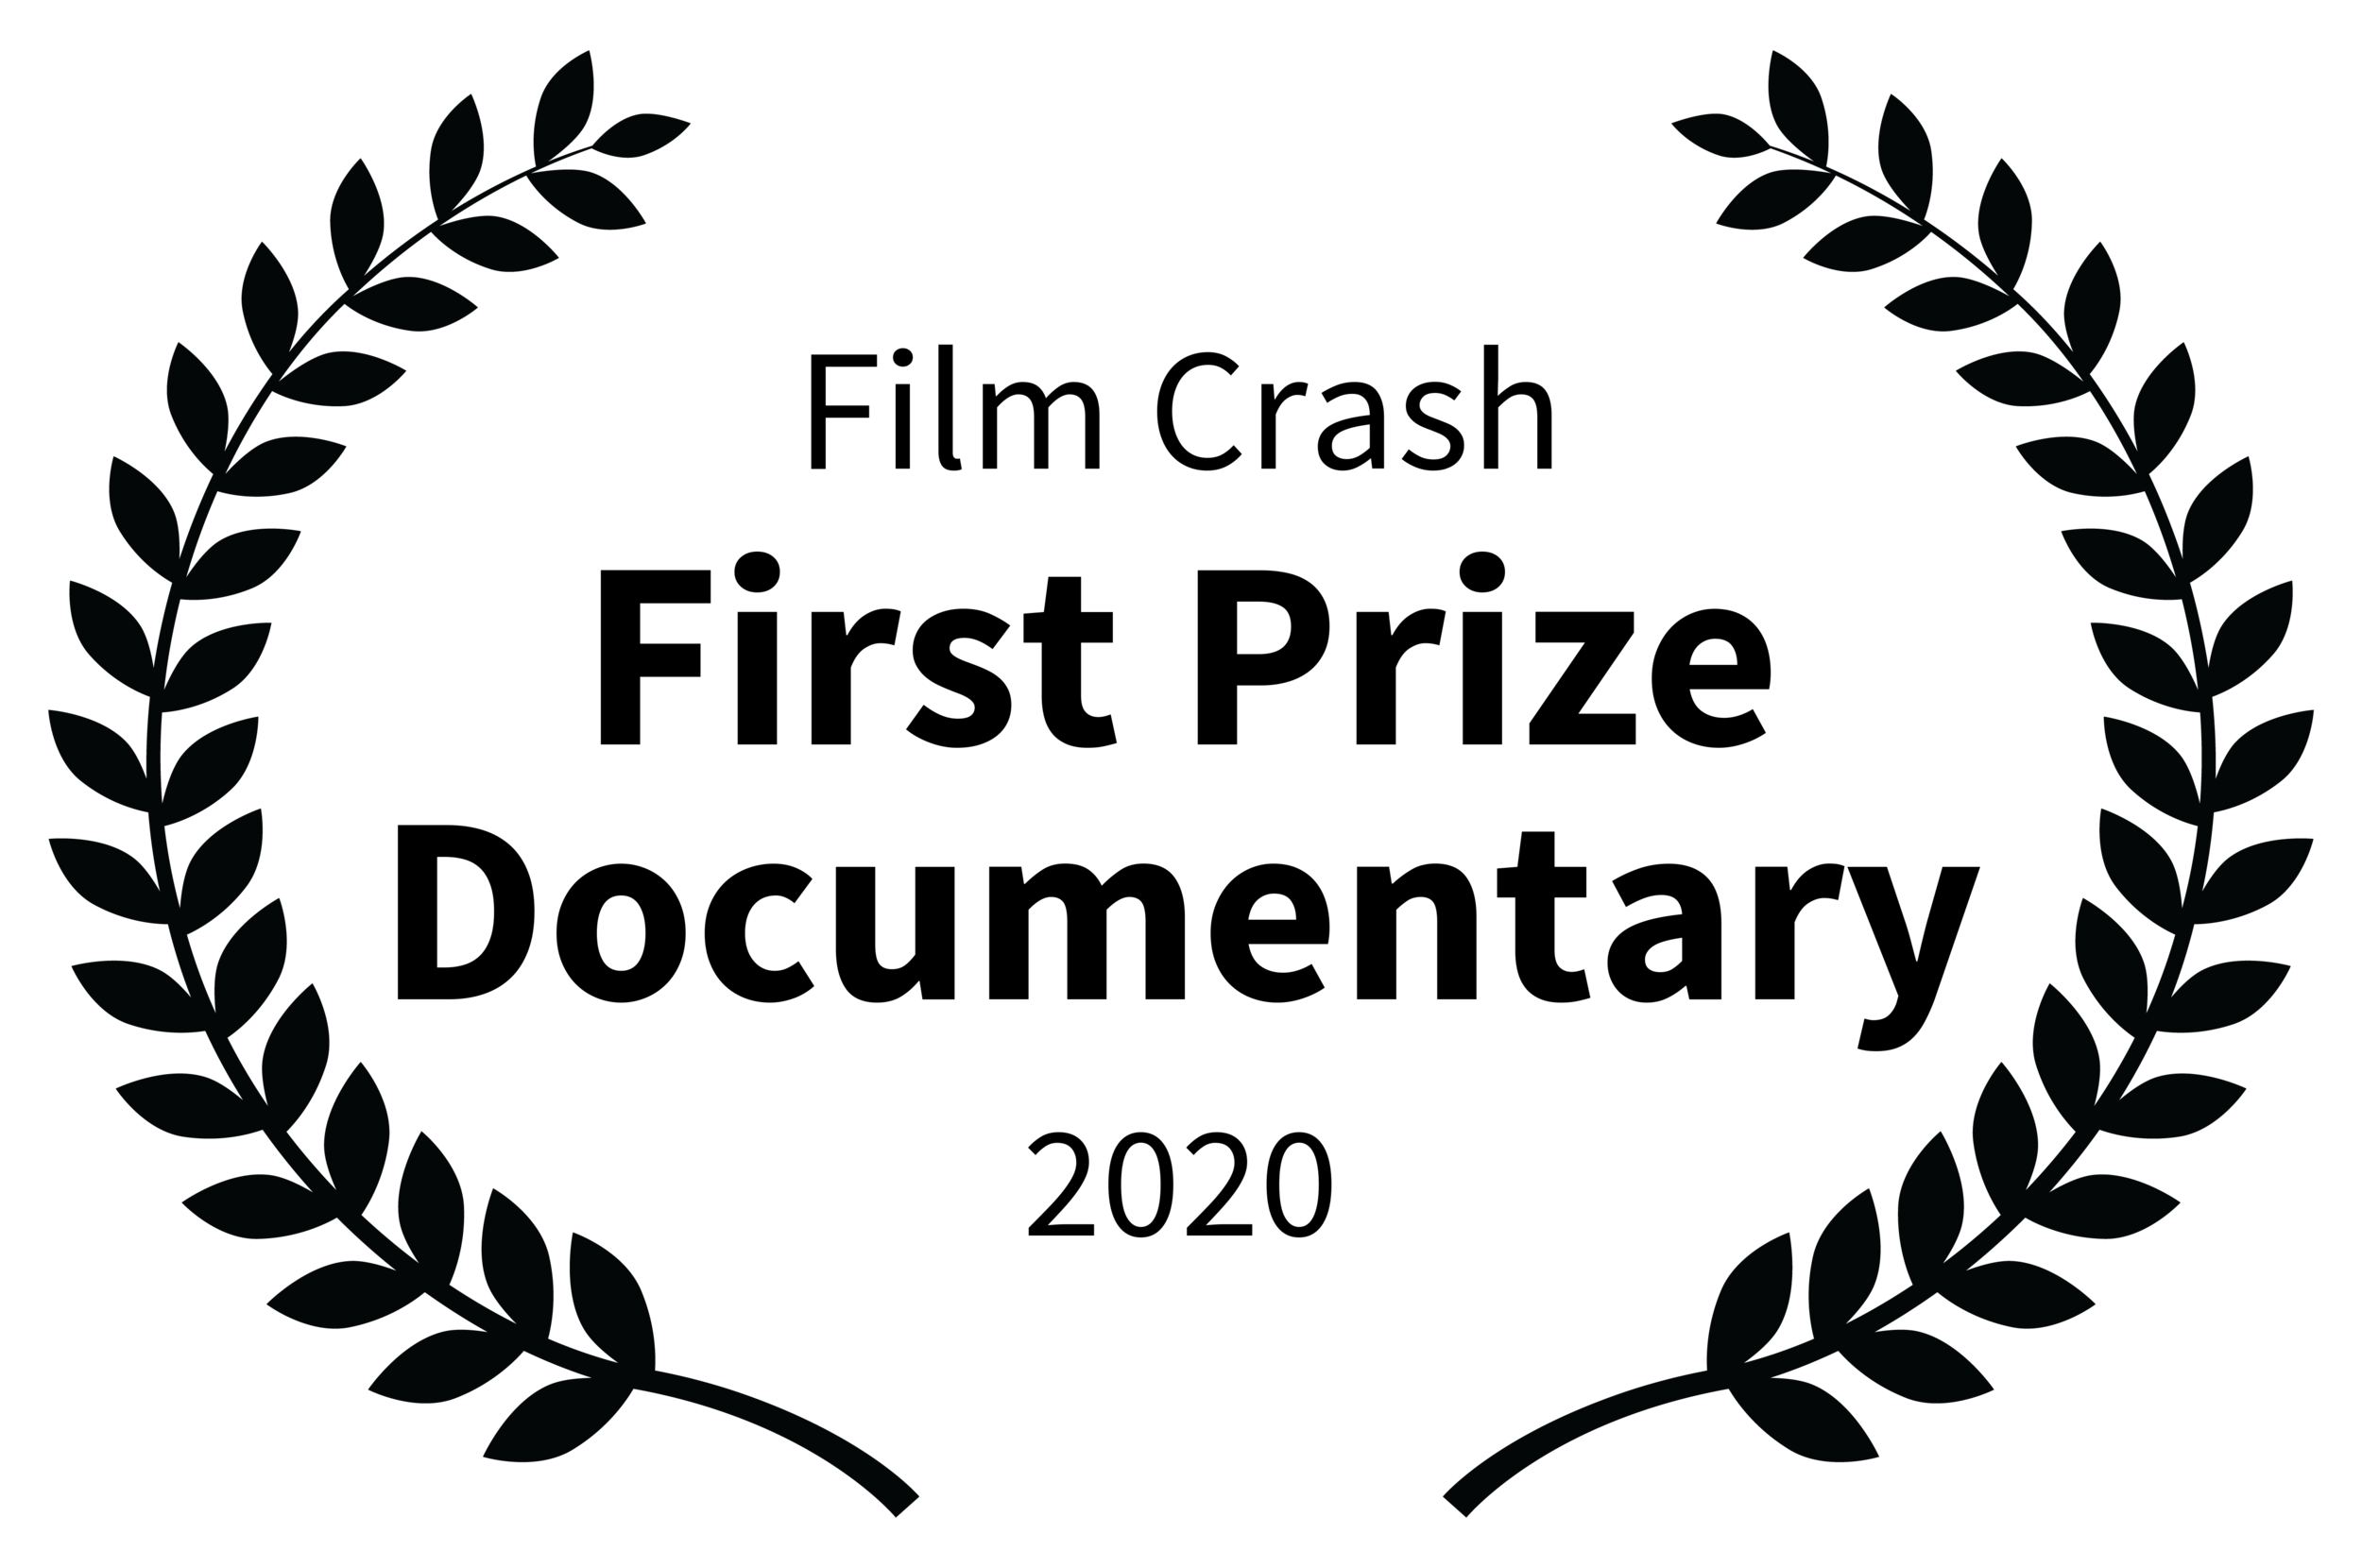 FilmCrash-FirstPrizeDocumentary-2020.png